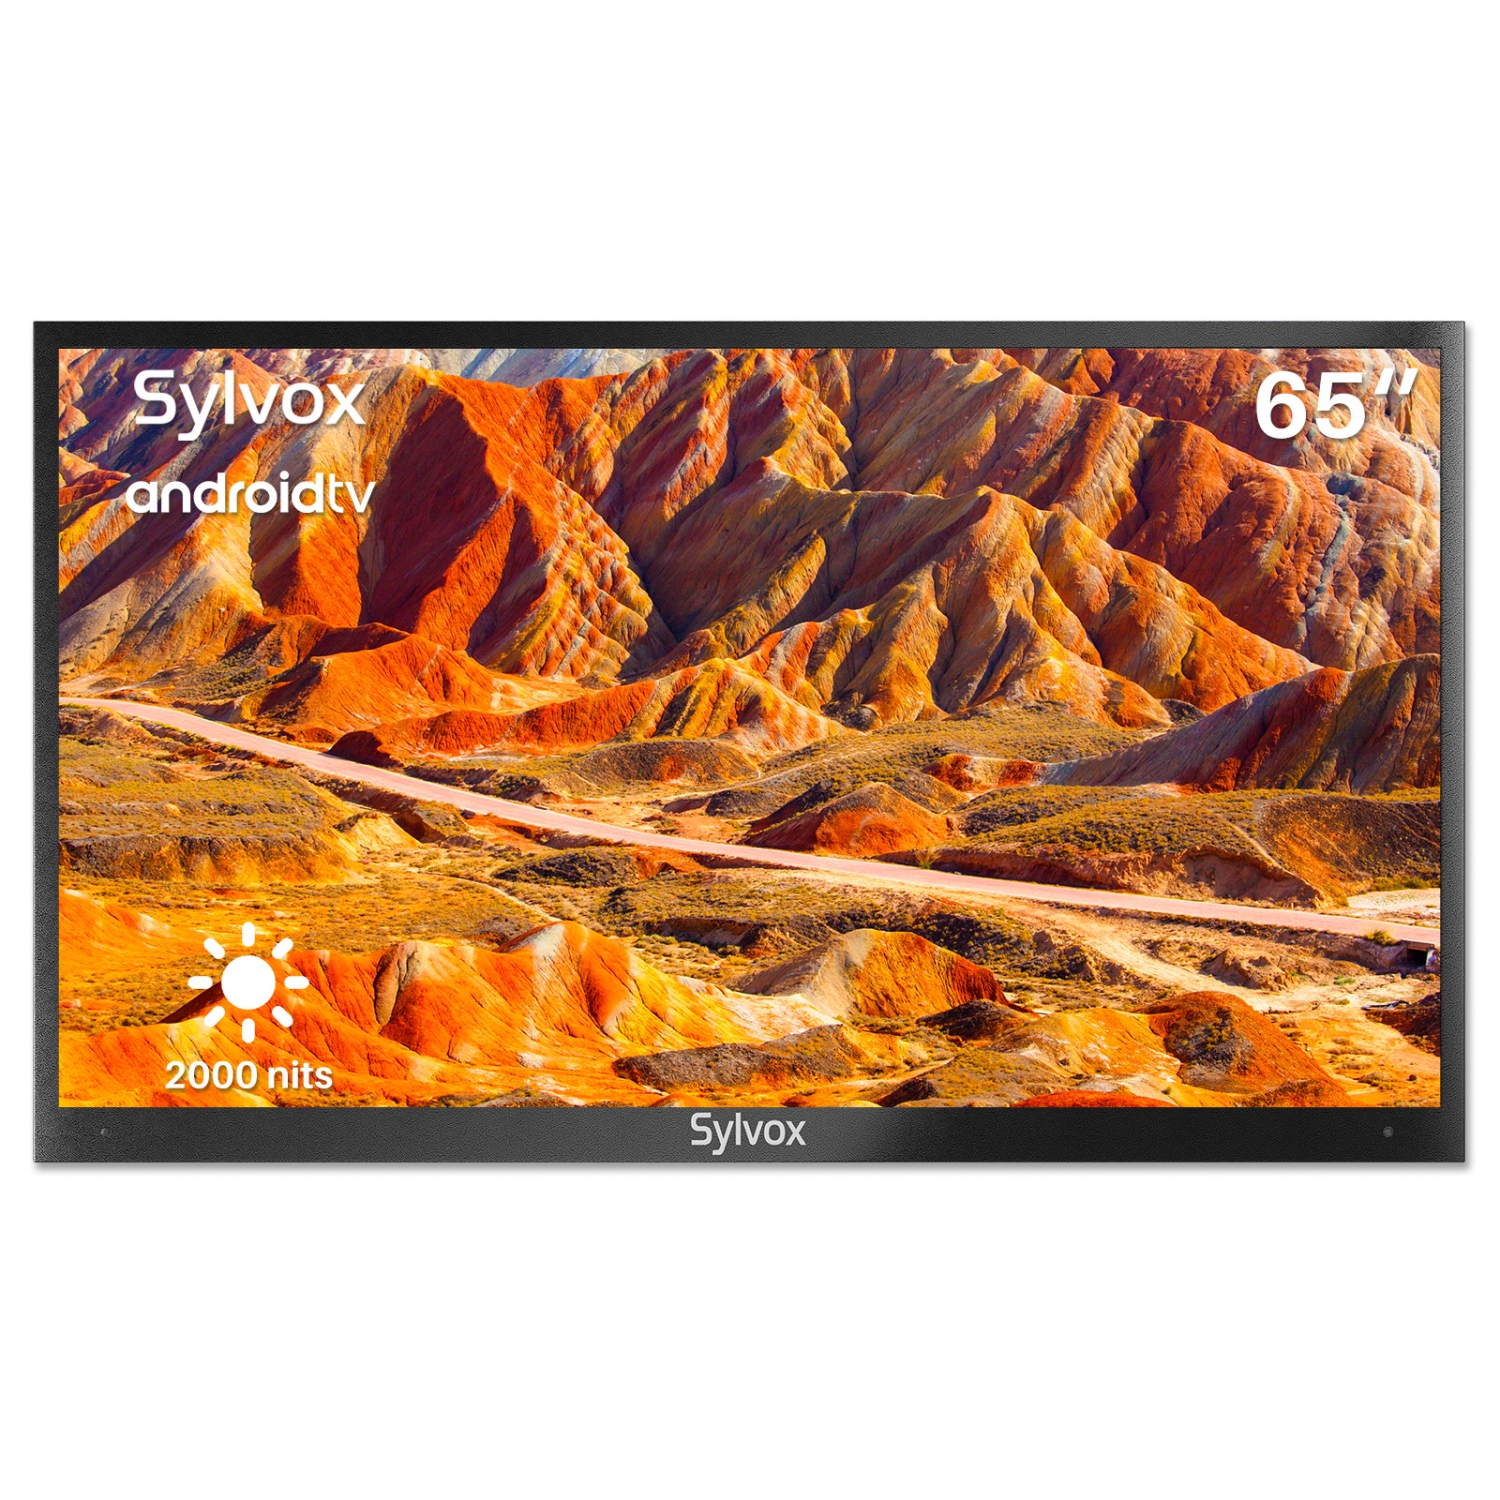 SYLVOX 65 inch Full Sun Outdoor TV Android Smart Outdoor TV 2000 Nits 4K UHD IP55 Weatherproof Outdoor TV with Voice Control & Chromecast (Pool Pro Series)